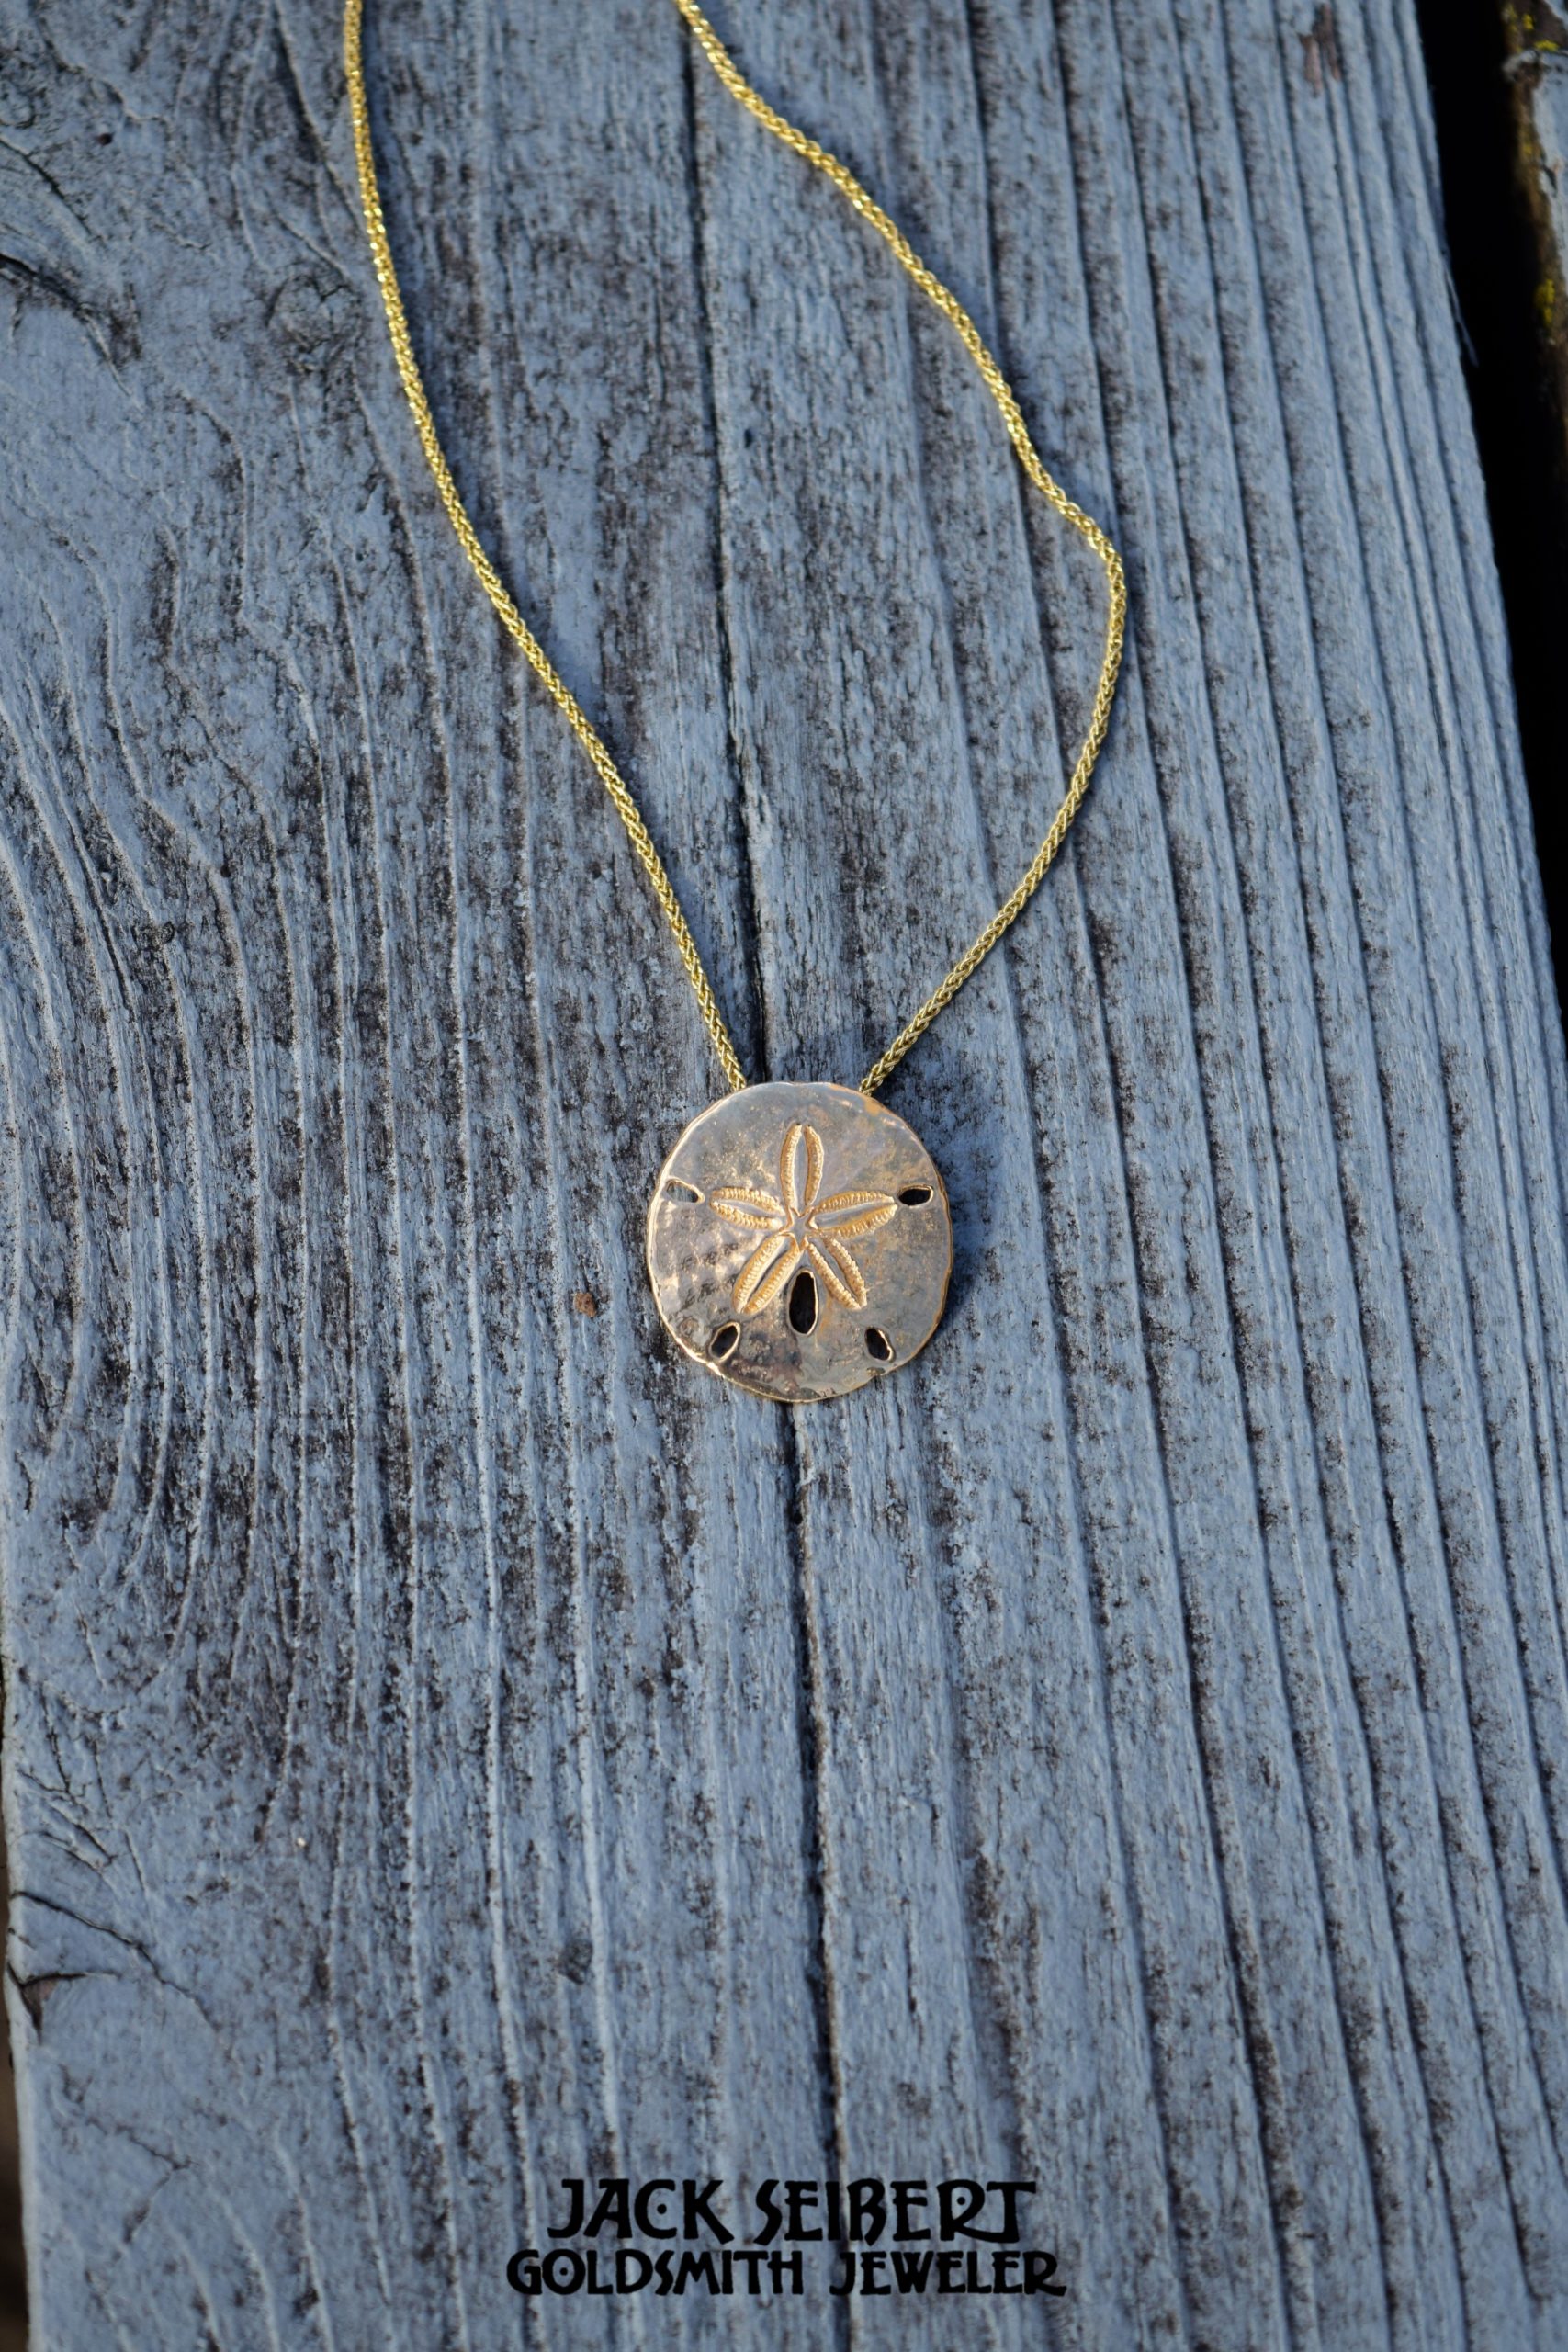 Exclusive Textured Sand Dollar Pendant on Chain